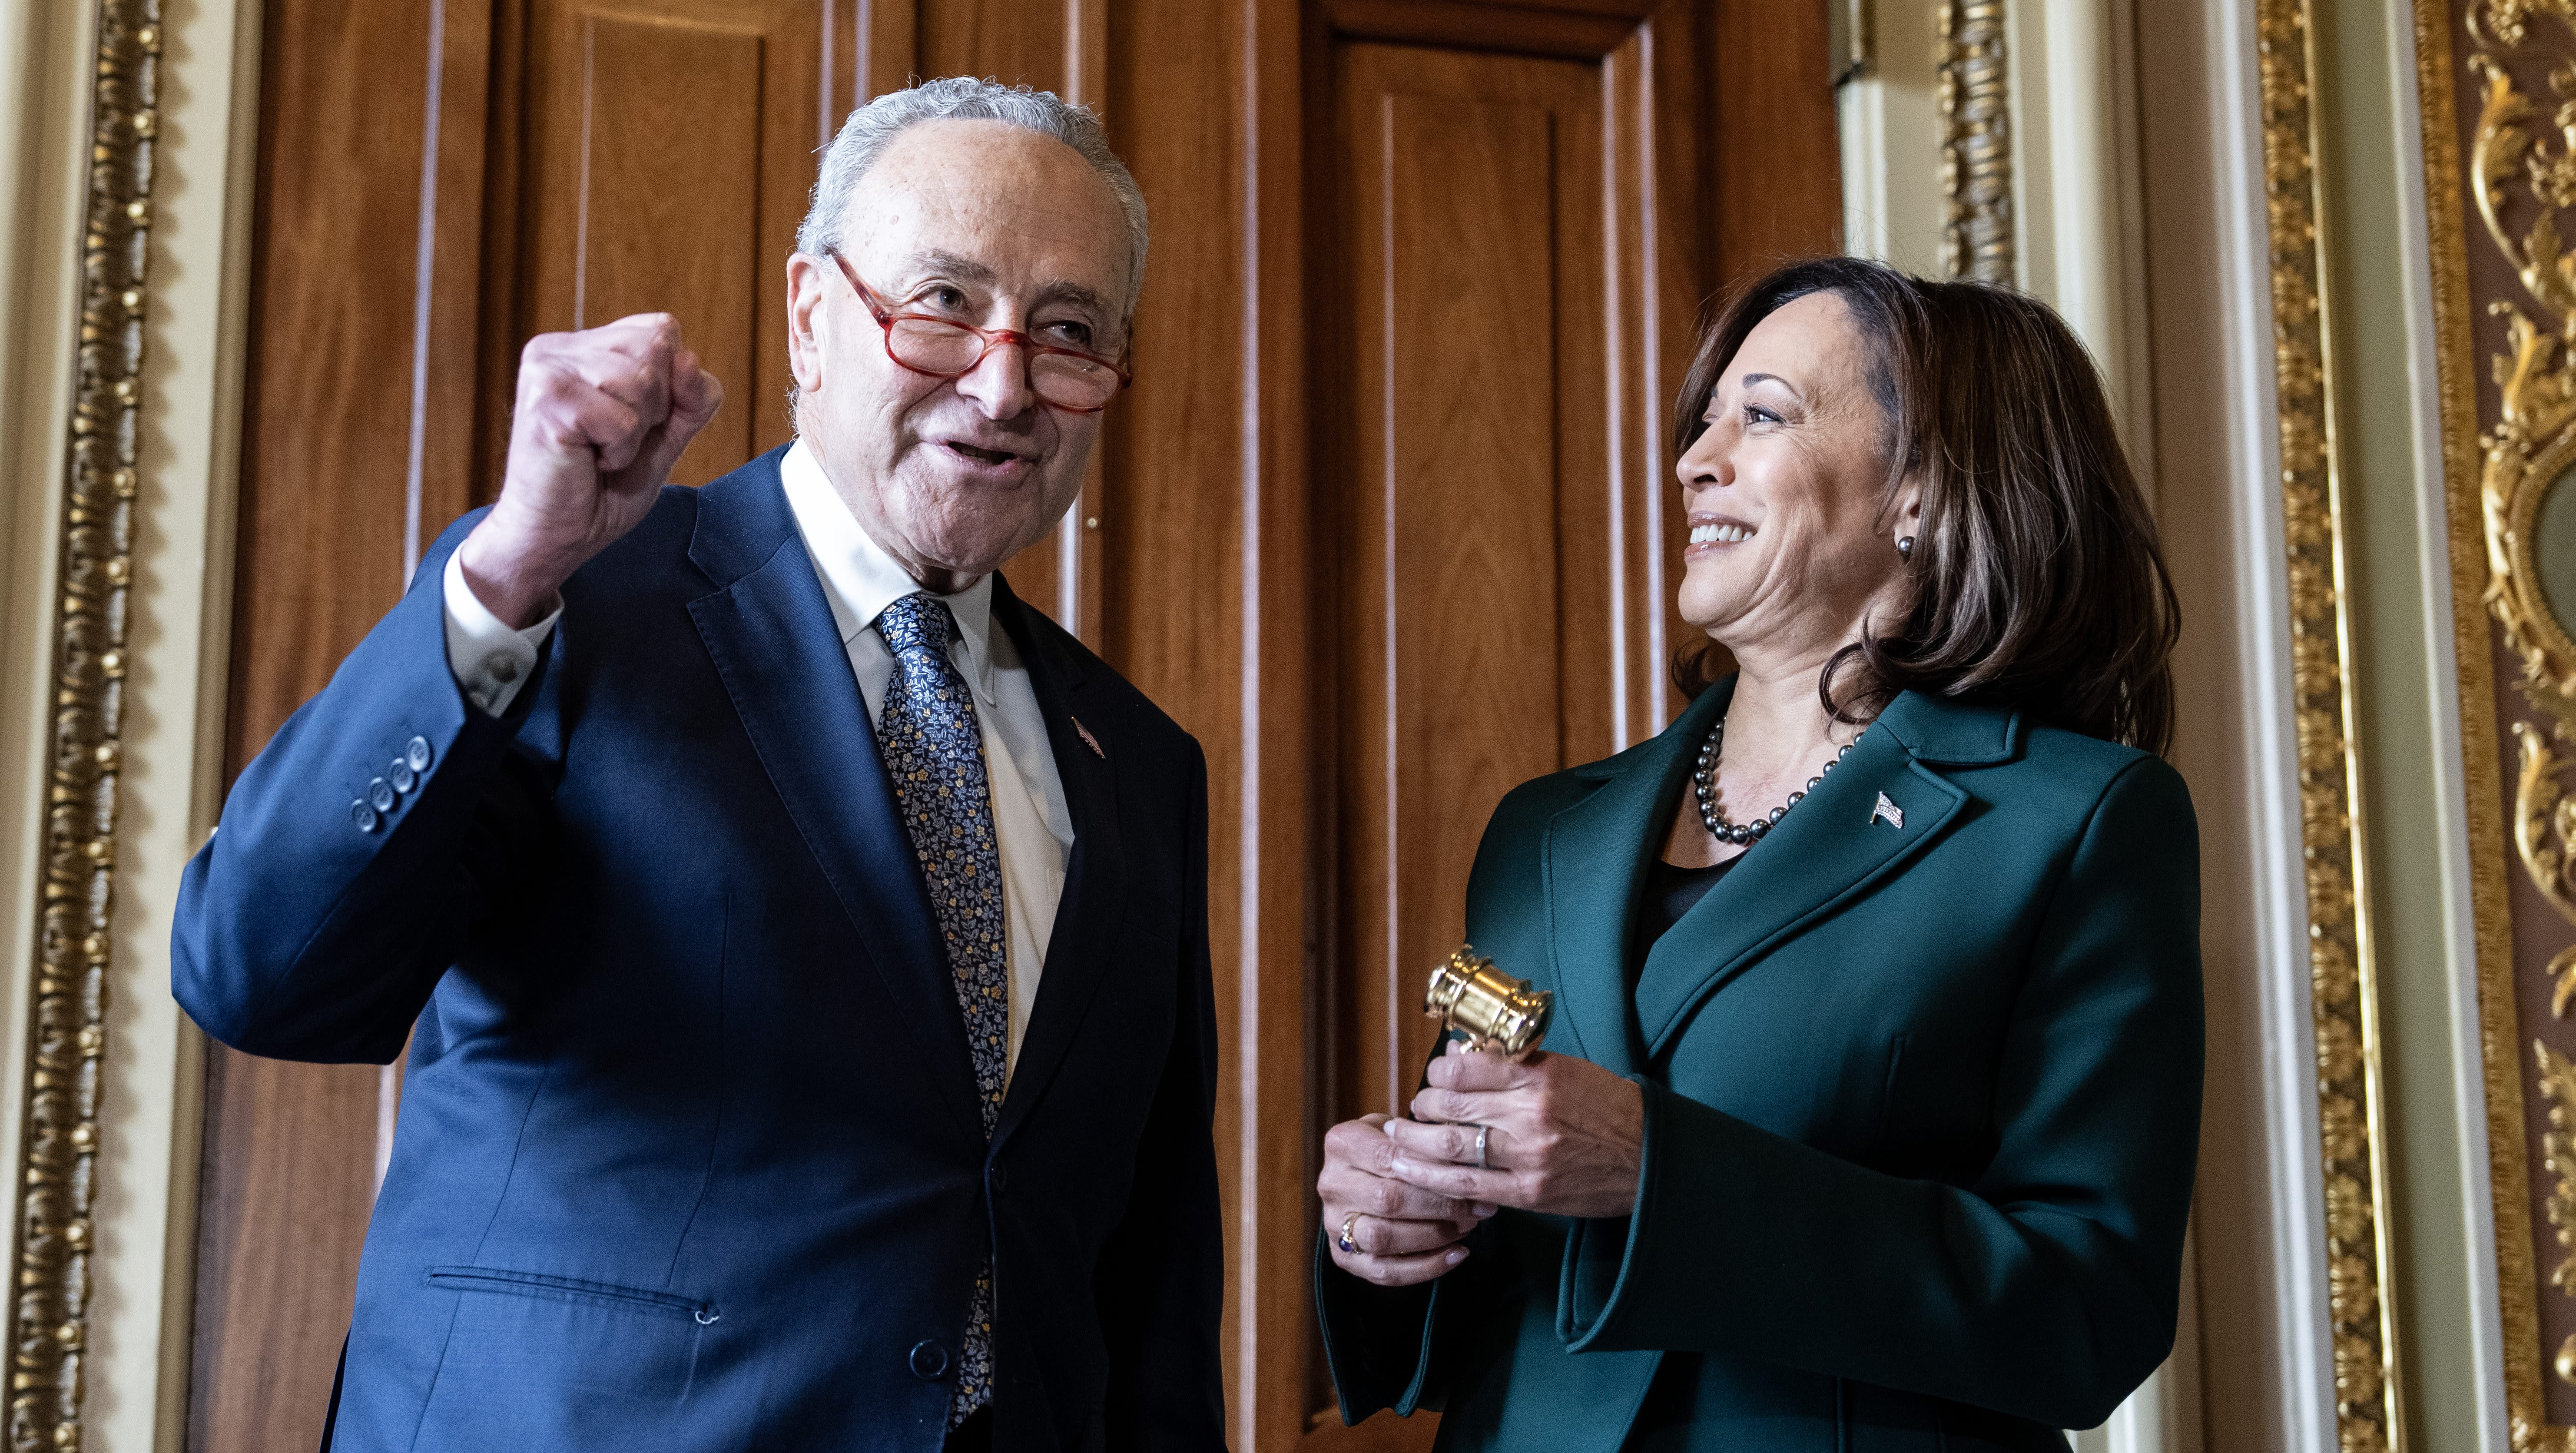 Chuck Schumer Endorses Kamala Harris As Democratic Nominee: ‘We Throw Our Support Behind Harris”